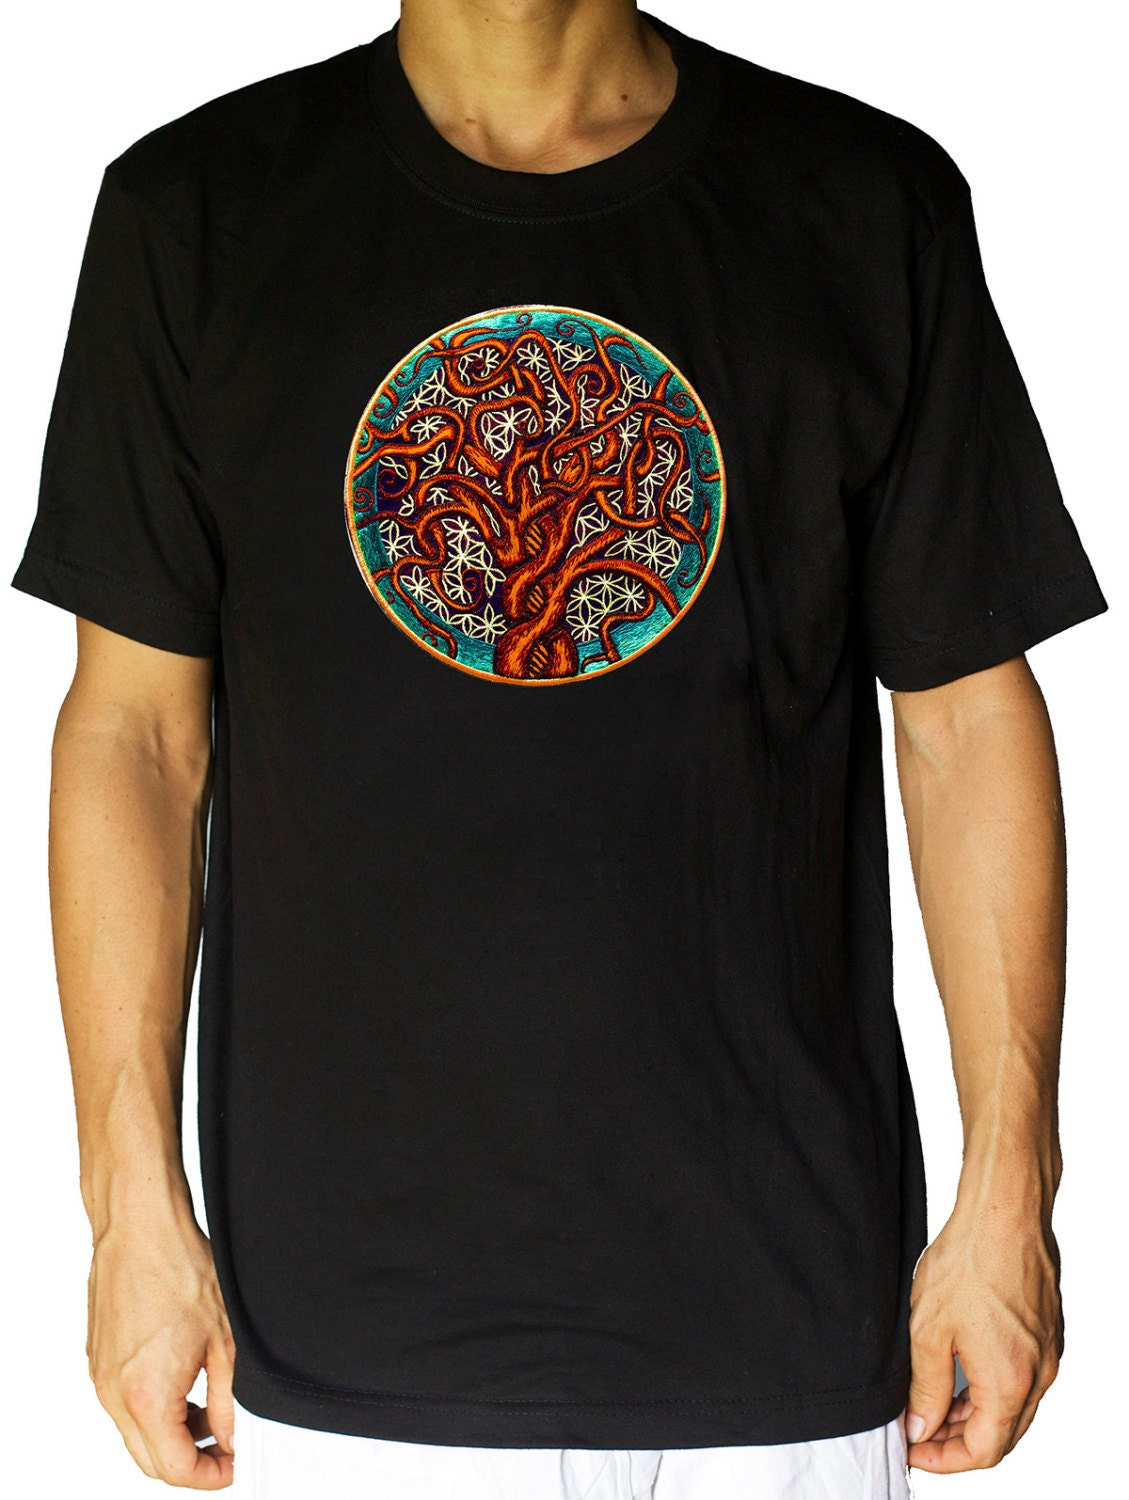 Tree of Life shirt flower of life - sacred geometry embroidery no print drunvalo melchizedek handmade - choose any colour and size